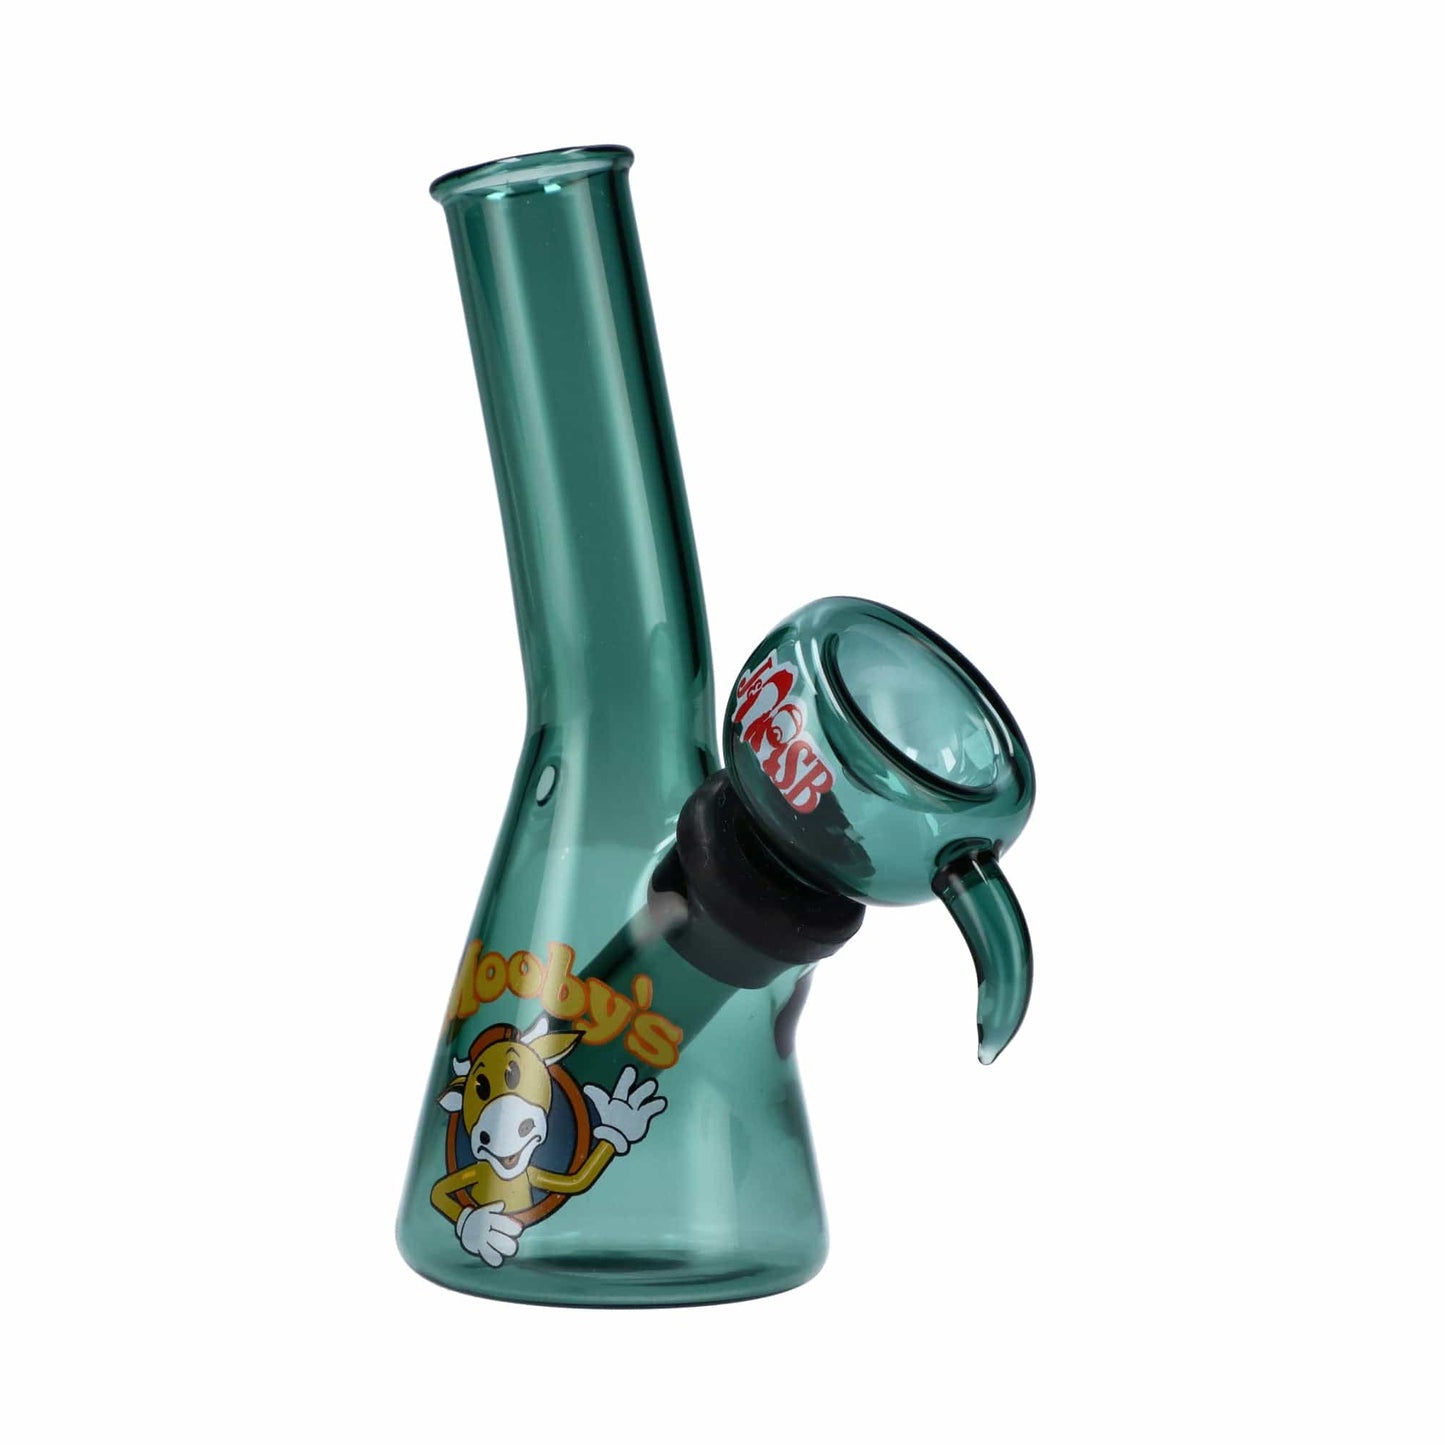 Jay and Silent Bob Bong 4" Mini Water Pipe - Mooby's Teal B5157T